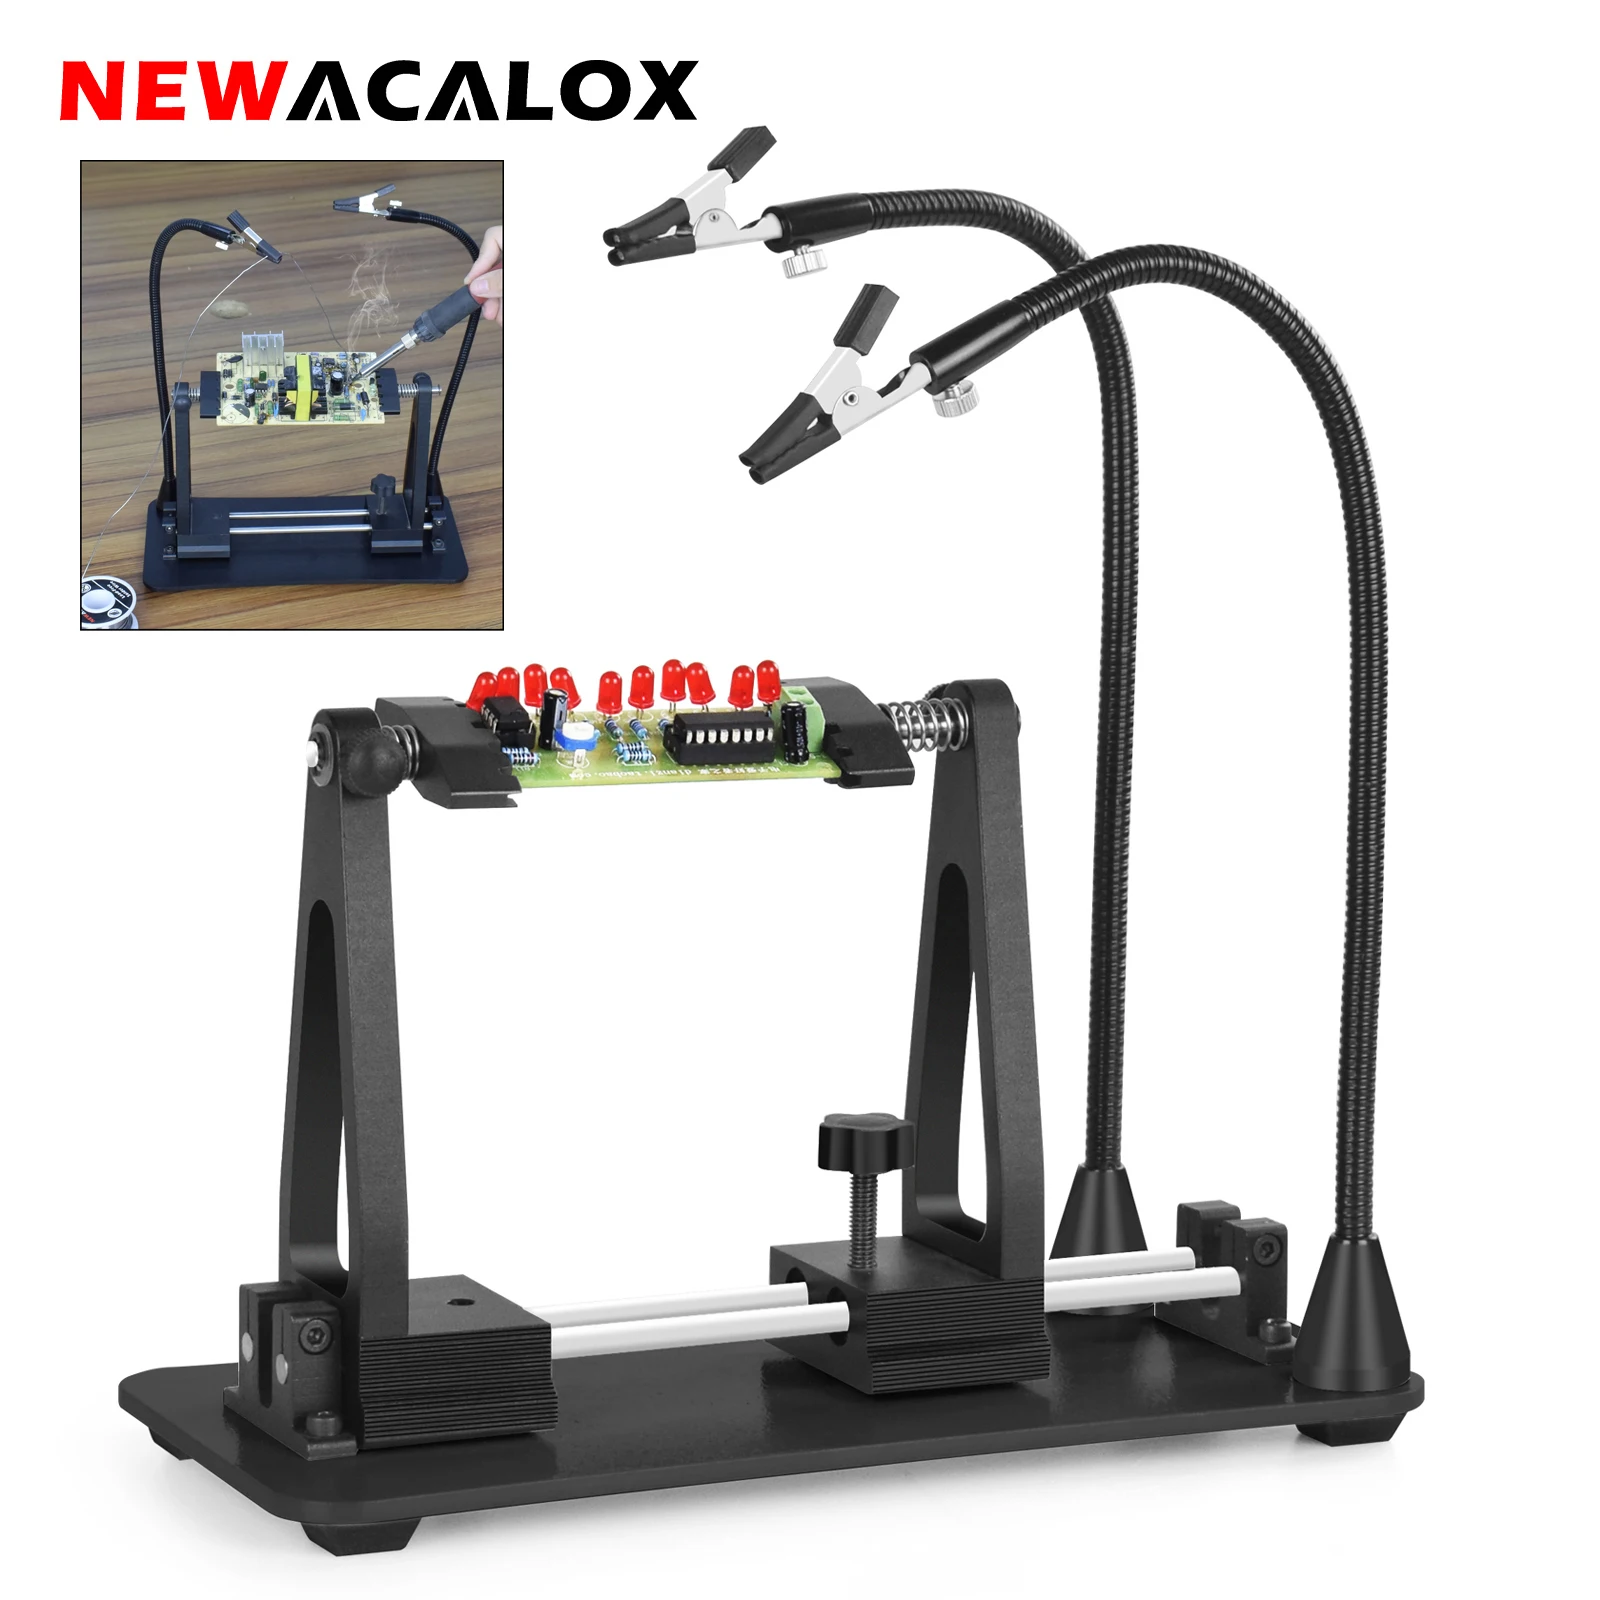 NEWACALOX 360° Adjustable PCB Holder with 2Pcs Magnetic Flexible Soldering Third Hand Welding Repair Helping Hands Station newacalox eu us 12v welding fume extractor soldering exhaust fan with 3 colors led light 2pcs flexible soldering third hand tool